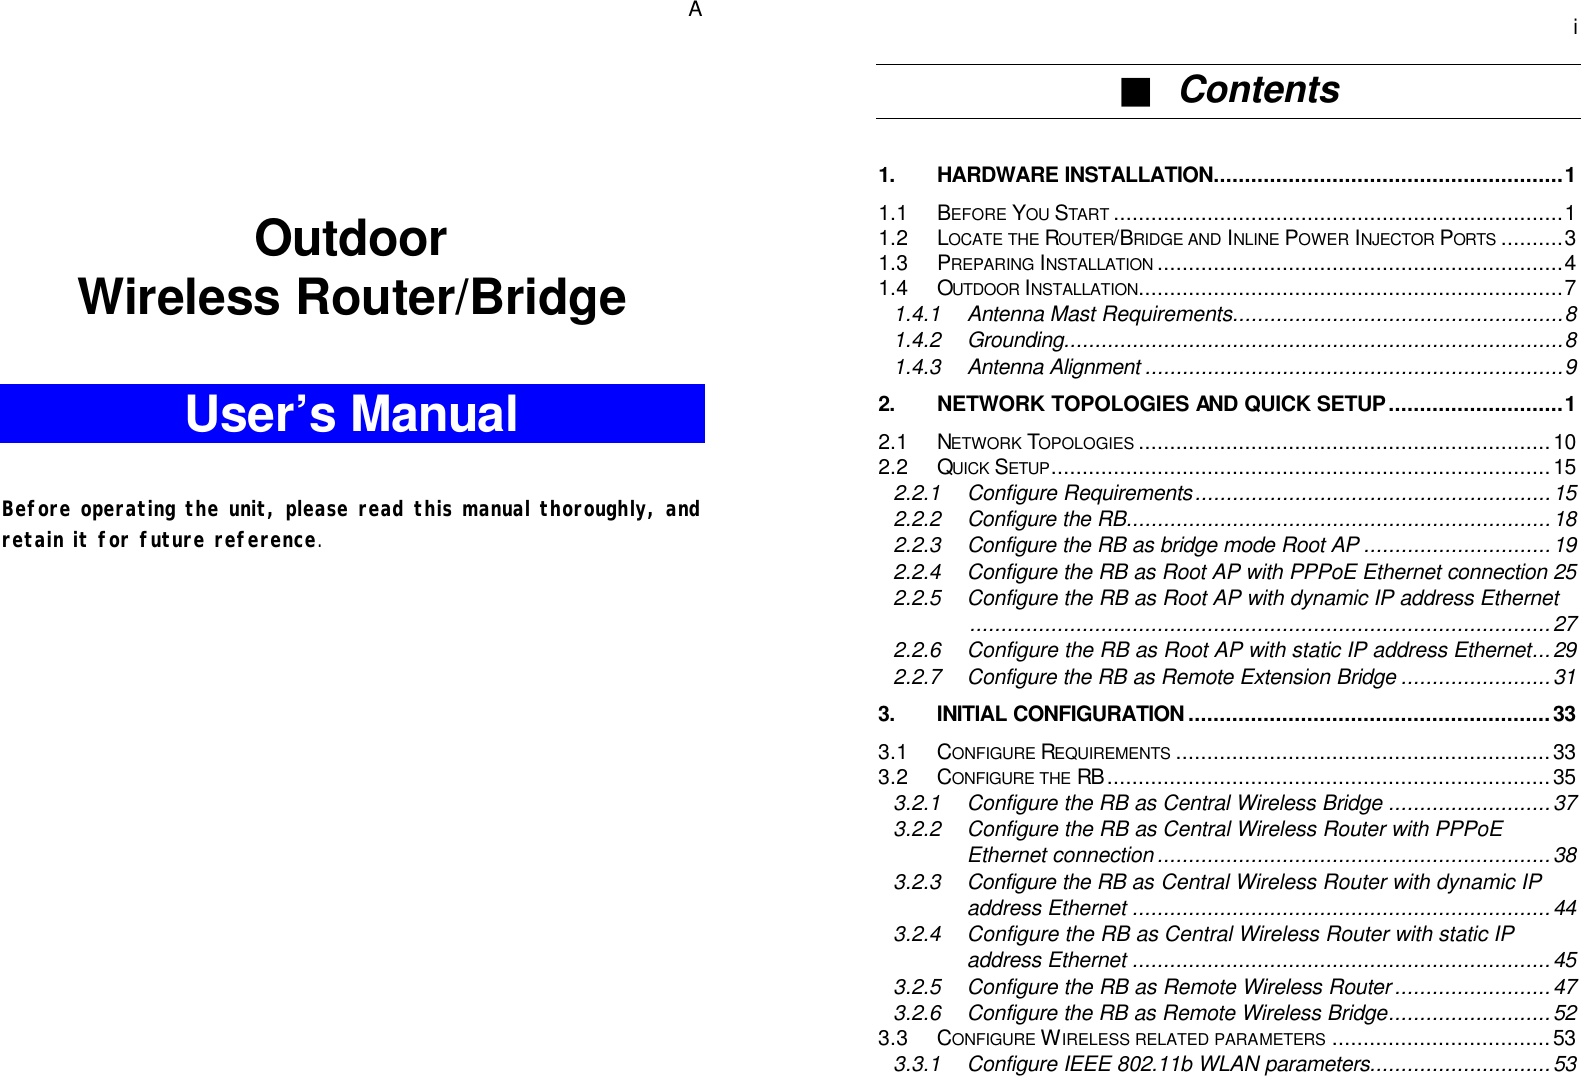   A    Outdoor Wireless Router/Bridge  User’s Manual   Before operating the unit, please read this manual thoroughly, and retain it for future reference.      i ■  Contents  1. HARDWARE INSTALLATION........................................................1 1.1 BEFORE YOU START ........................................................................1 1.2 LOCATE THE ROUTER/BRIDGE AND INLINE POWER INJECTOR PORTS ..........3 1.3 PREPARING INSTALLATION .................................................................4 1.4 OUTDOOR INSTALLATION....................................................................7 1.4.1 Antenna Mast Requirements.....................................................8 1.4.2 Grounding................................................................................8 1.4.3 Antenna Alignment ...................................................................9 2. NETWORK TOPOLOGIES AND QUICK SETUP............................1 2.1 NETWORK TOPOLOGIES ..................................................................10 2.2 QUICK SETUP................................................................................15 2.2.1 Configure Requirements.........................................................15 2.2.2 Configure the RB....................................................................18 2.2.3 Configure the RB as bridge mode Root AP ..............................19 2.2.4 Configure the RB as Root AP with PPPoE Ethernet connection 25 2.2.5 Configure the RB as Root AP with dynamic IP address Ethernet.............................................................................................27 2.2.6 Configure the RB as Root AP with static IP address Ethernet...29 2.2.7 Configure the RB as Remote Extension Bridge ........................31 3. INITIAL CONFIGURATION..........................................................33 3.1 CONFIGURE REQUIREMENTS ............................................................33 3.2 CONFIGURE THE RB .......................................................................35 3.2.1 Configure the RB as Central Wireless Bridge ..........................37 3.2.2 Configure the RB as Central Wireless Router with PPPoE Ethernet connection ...............................................................38 3.2.3 Configure the RB as Central Wireless Router with dynamic IP address Ethernet ...................................................................44 3.2.4 Configure the RB as Central Wireless Router with static IP address Ethernet ...................................................................45 3.2.5 Configure the RB as Remote Wireless Router .........................47 3.2.6 Configure the RB as Remote Wireless Bridge..........................52 3.3 CONFIGURE WIRELESS RELATED PARAMETERS ...................................53 3.3.1 Configure IEEE 802.11b WLAN parameters.............................53 